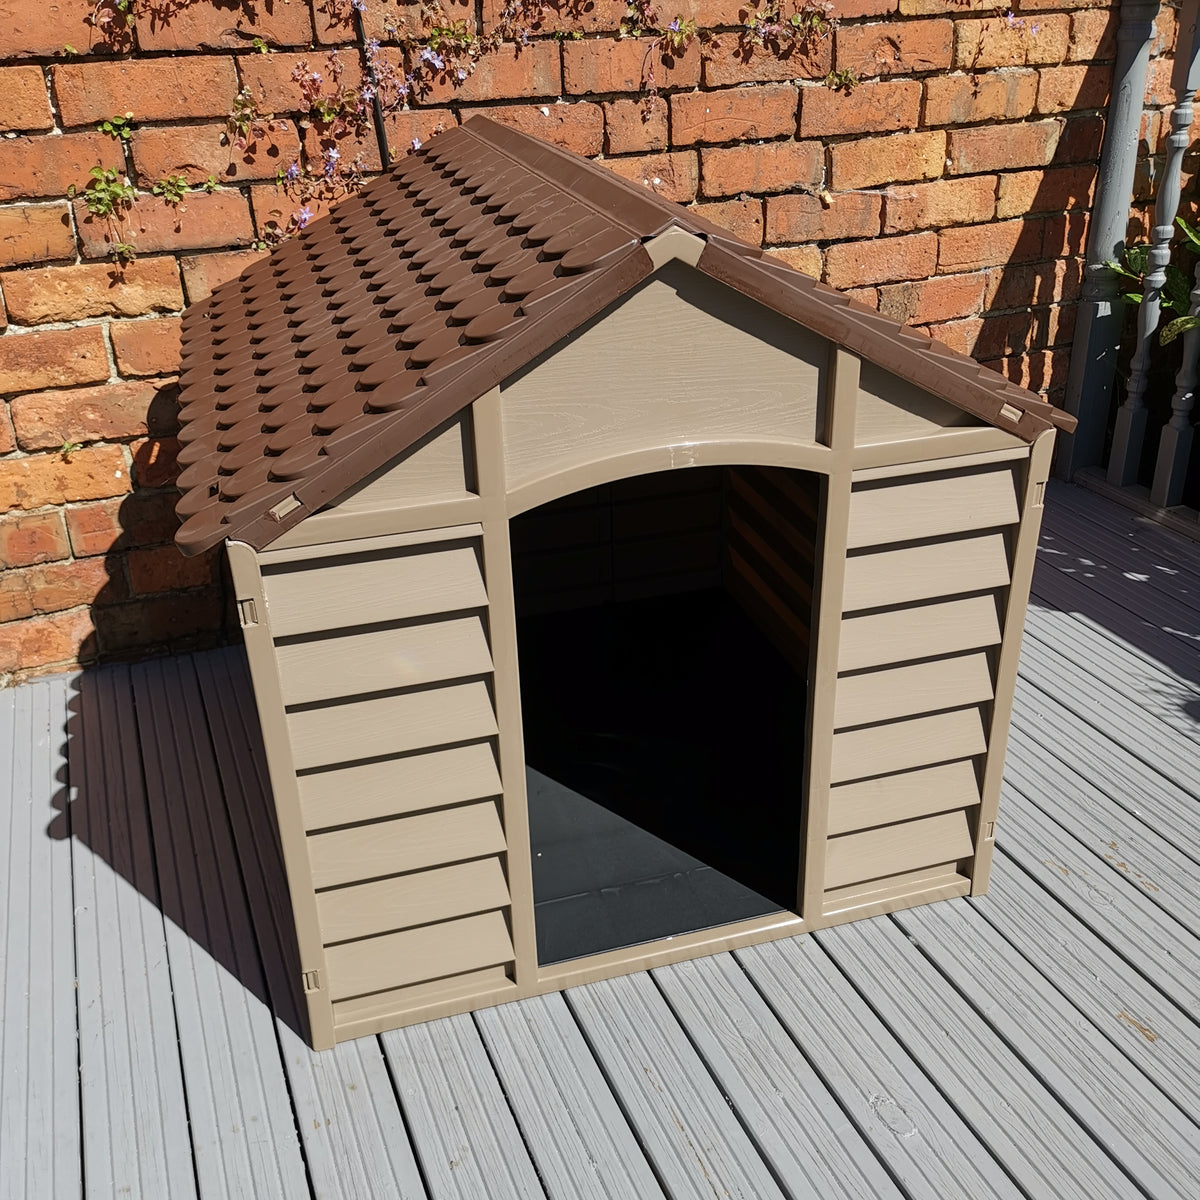 Large Plastic Dog Kennel / House in Brown – 86cm x 84cm x 82cm